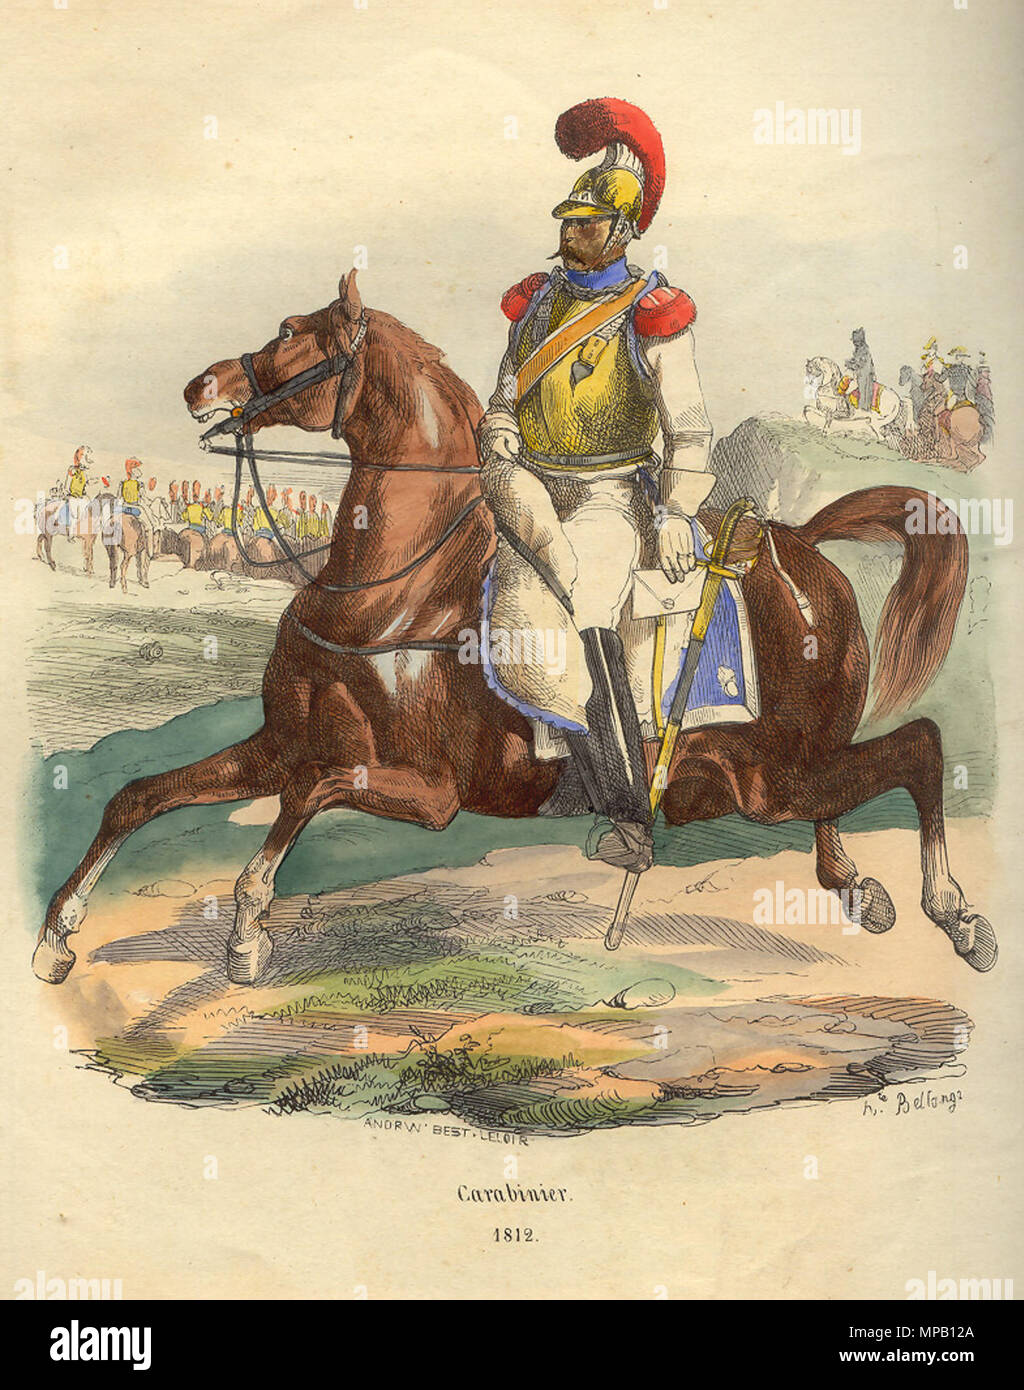 . French carabiner (heavy cavalry) of Napoleon's troops. From book ofP.-M. Laurent de L`Ardeche «Histoire de Napoleon», 1843 . 1843.   Hippolyte Bellangé  (1800–1866)     Alternative names Joseph-Louis-Hippolyte Bellangé  Description French painter and lithographer  Date of birth/death 17 January 1800 10 April 1866  Location of birth/death Paris Paris  Work location Paris (1818 - 1866); Rouen (1837 - 1854)  Authority control  : Q3136027 VIAF: 22241299 ISNI: 0000 0001 0837 3002 ULAN: 500015839 LCCN: no96041887 GND: 124332722 WorldCat 917 Napoleon Carabiner of 1812 by Bellange Stock Photo